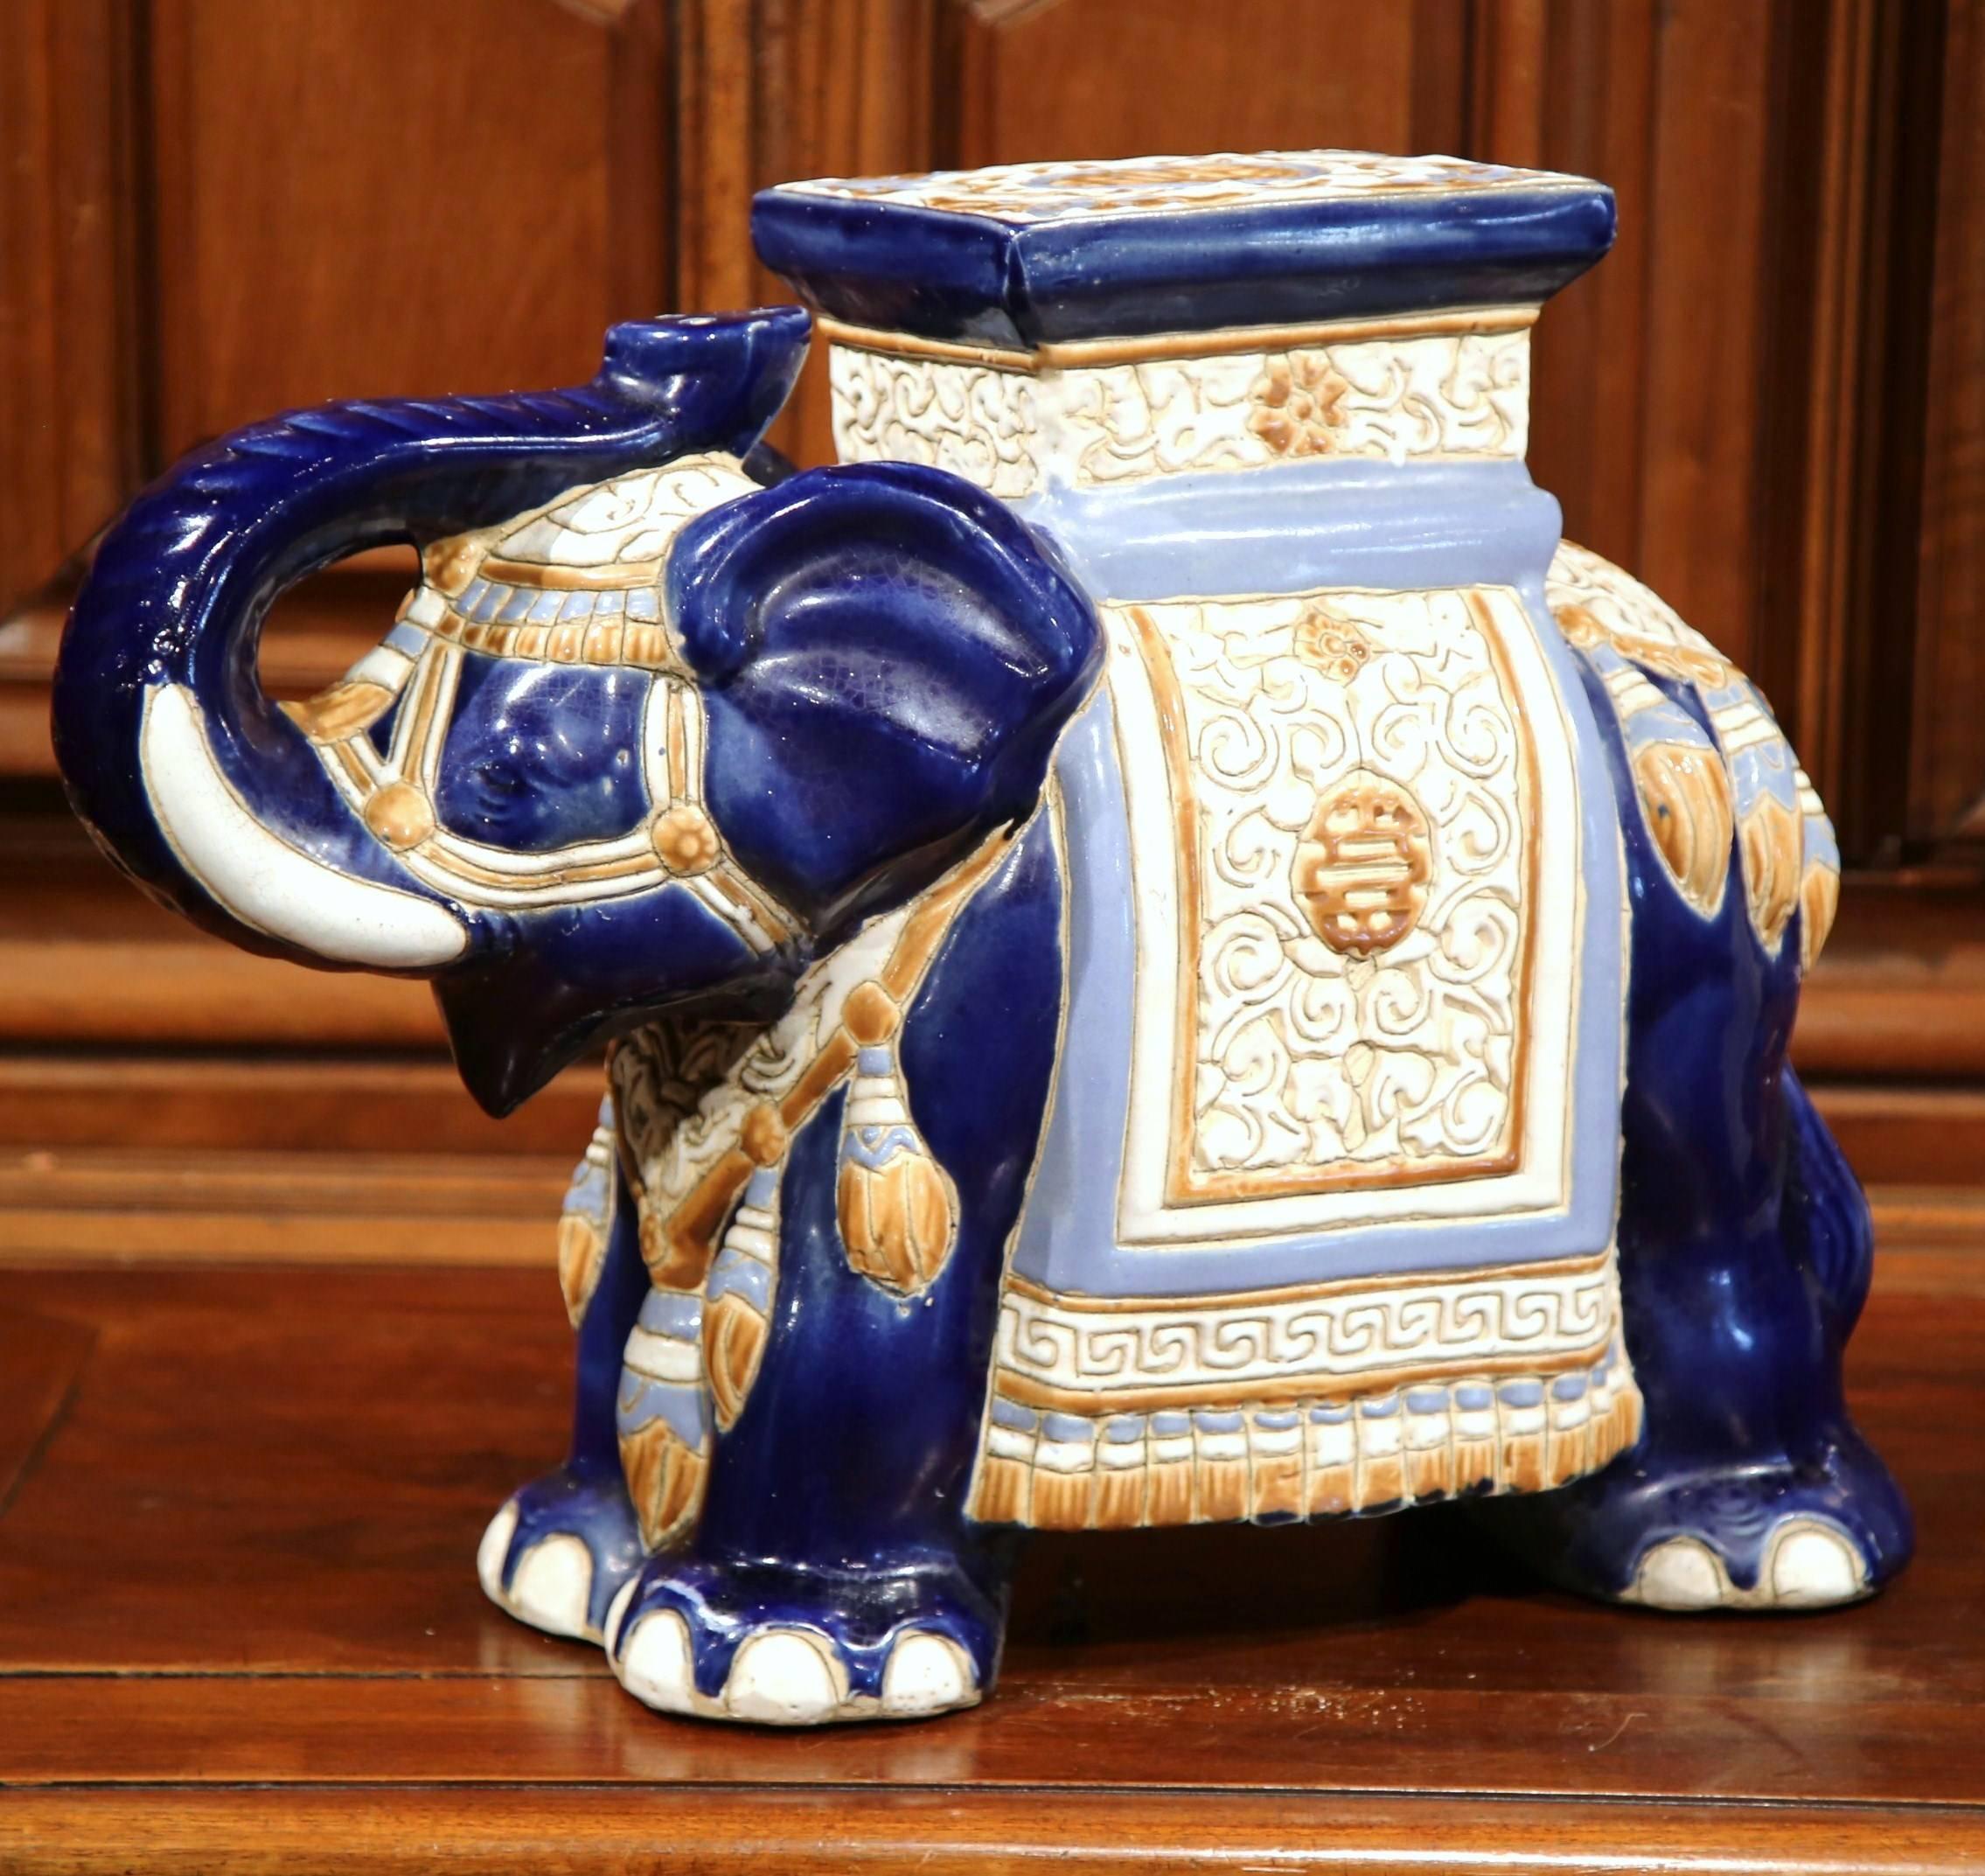 This interesting, porcelain garden seat was sculpted in France, circa 1950. The vintage piece is in the shape of an elephant raising his trunk, which is heavily decorated in oriental finery. The mammal has a square pedestal on top, and is